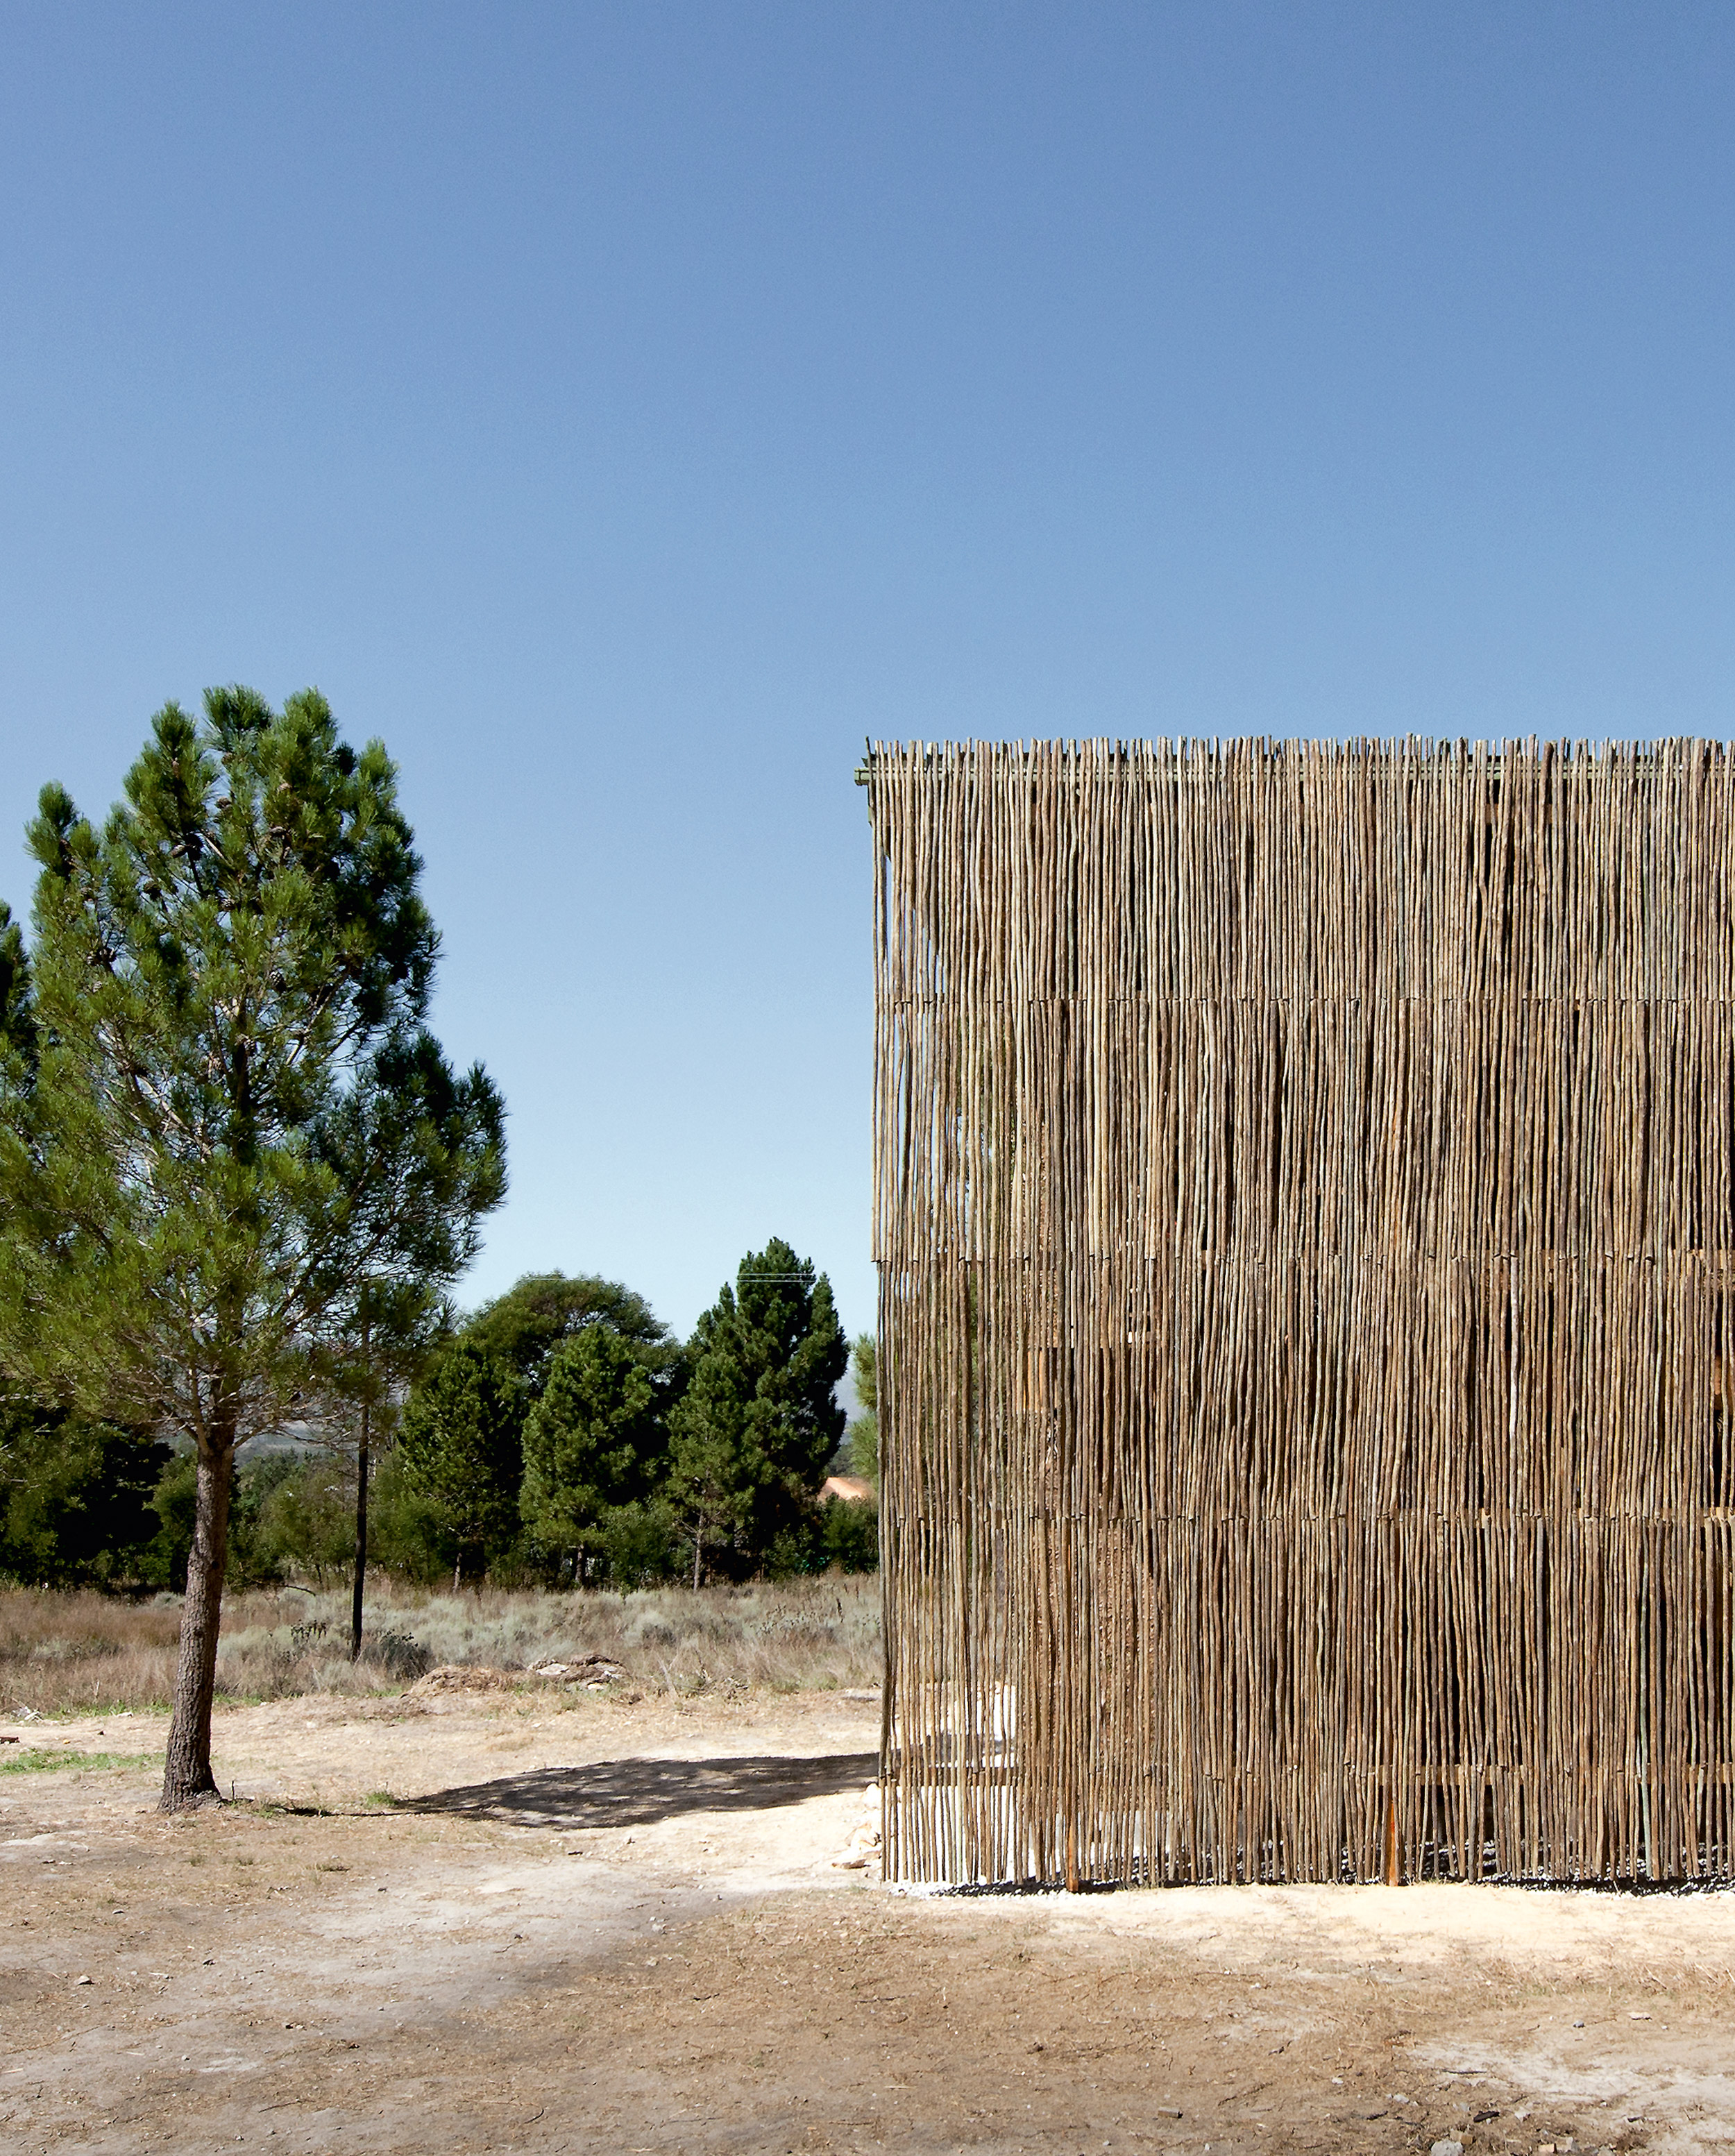 Ukuqala Project in Grabouw